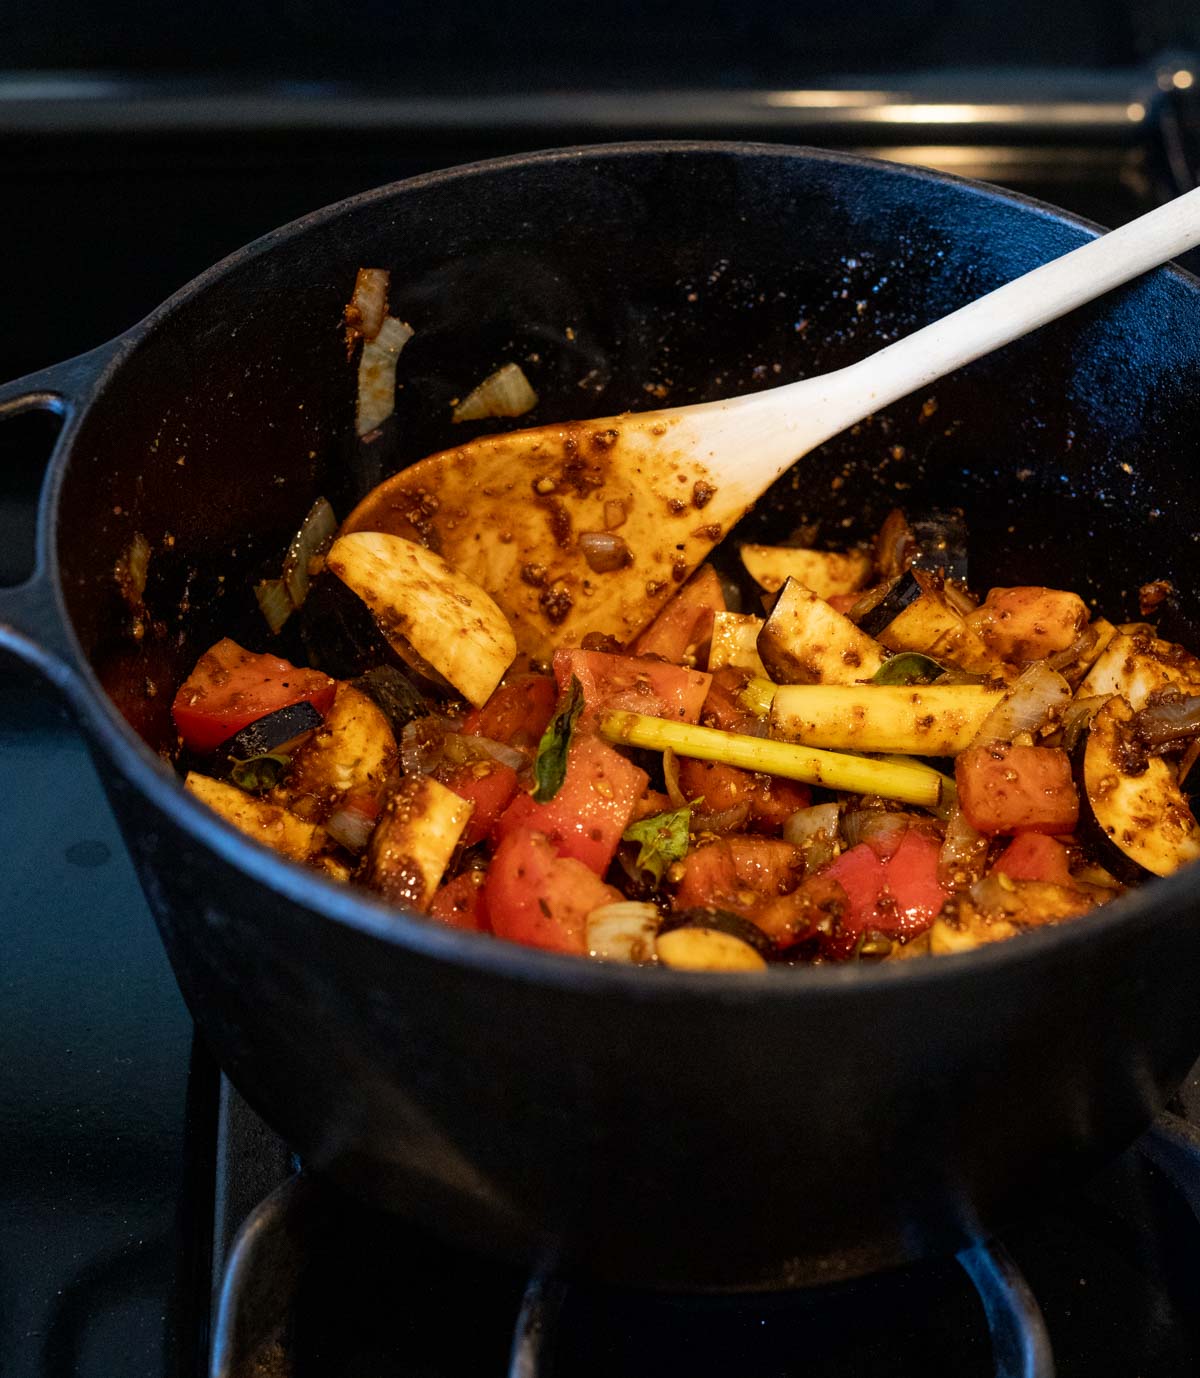 Spices, eggplant, tomato and other ingredients added to the Dutch oven.